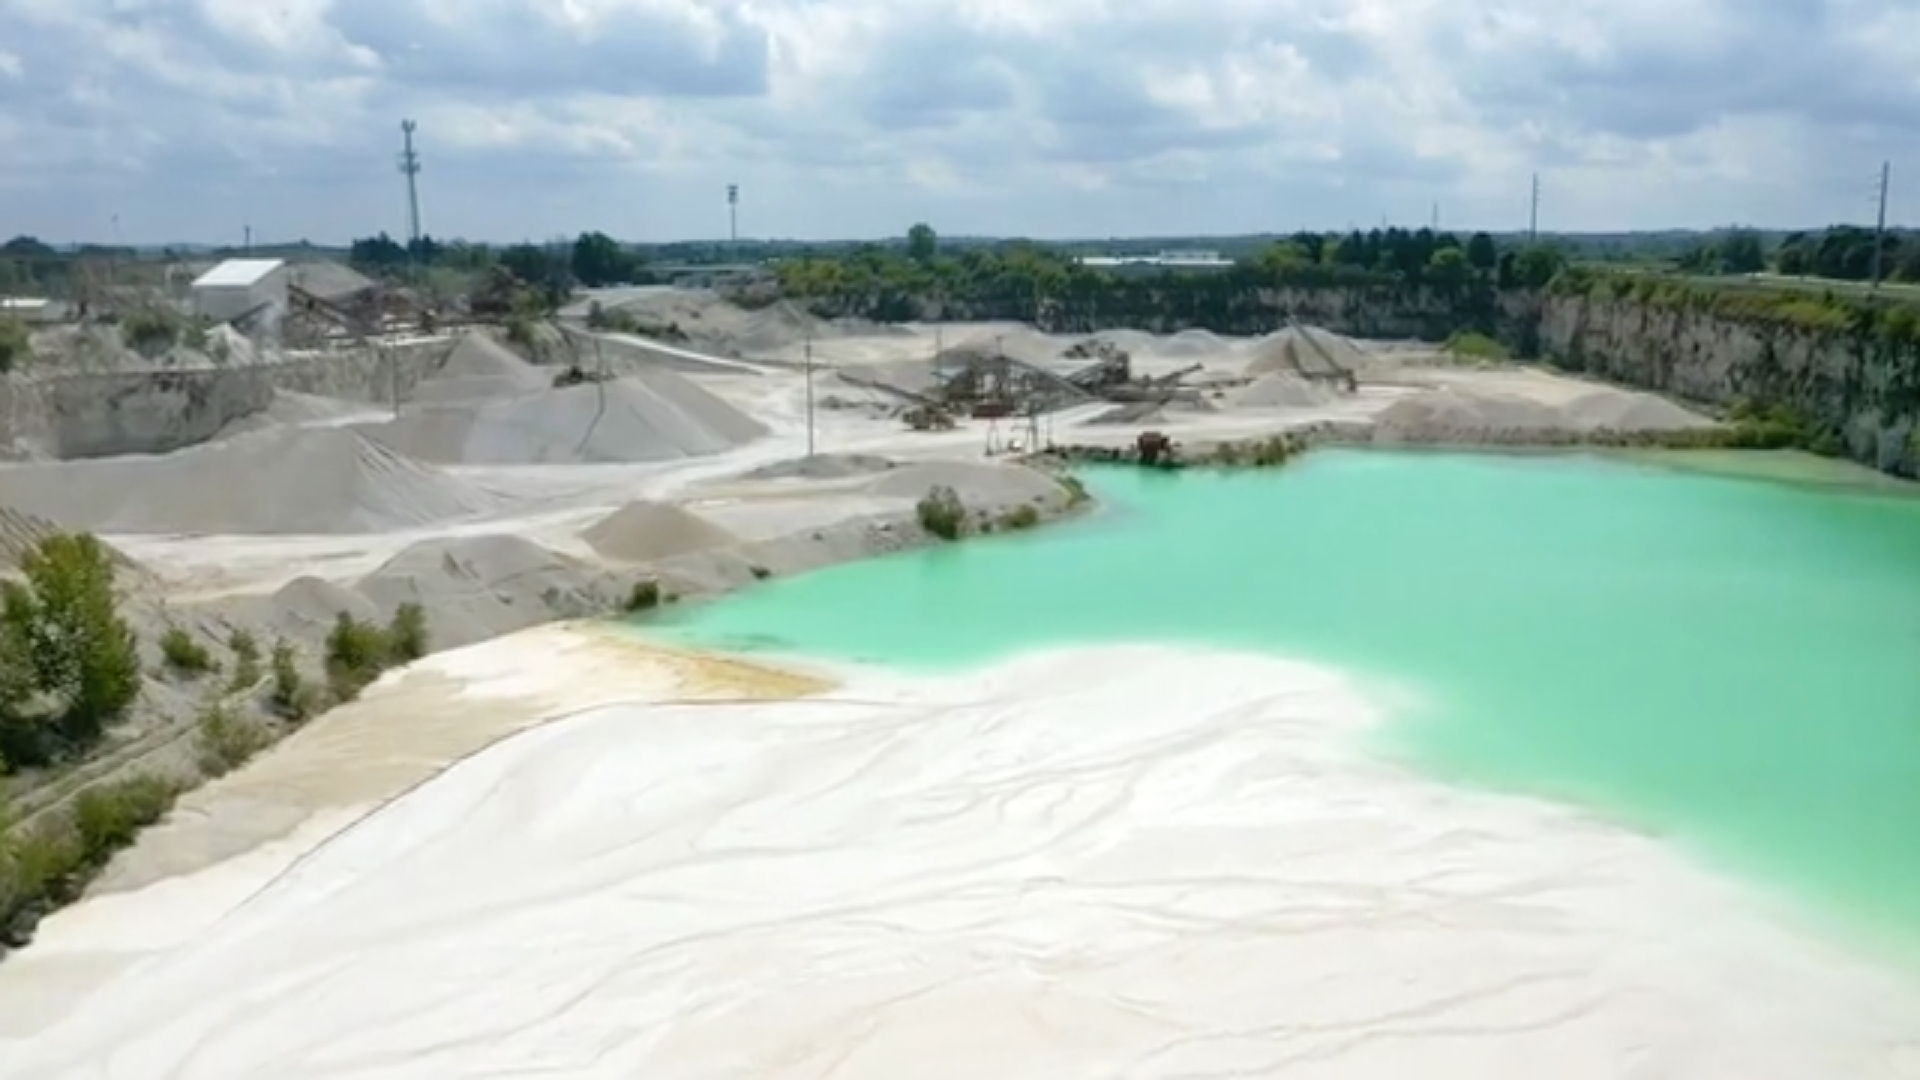 A drone photo of a limestone quarry showing the machines and ground stone in the distance and the settling pond in the foreground.